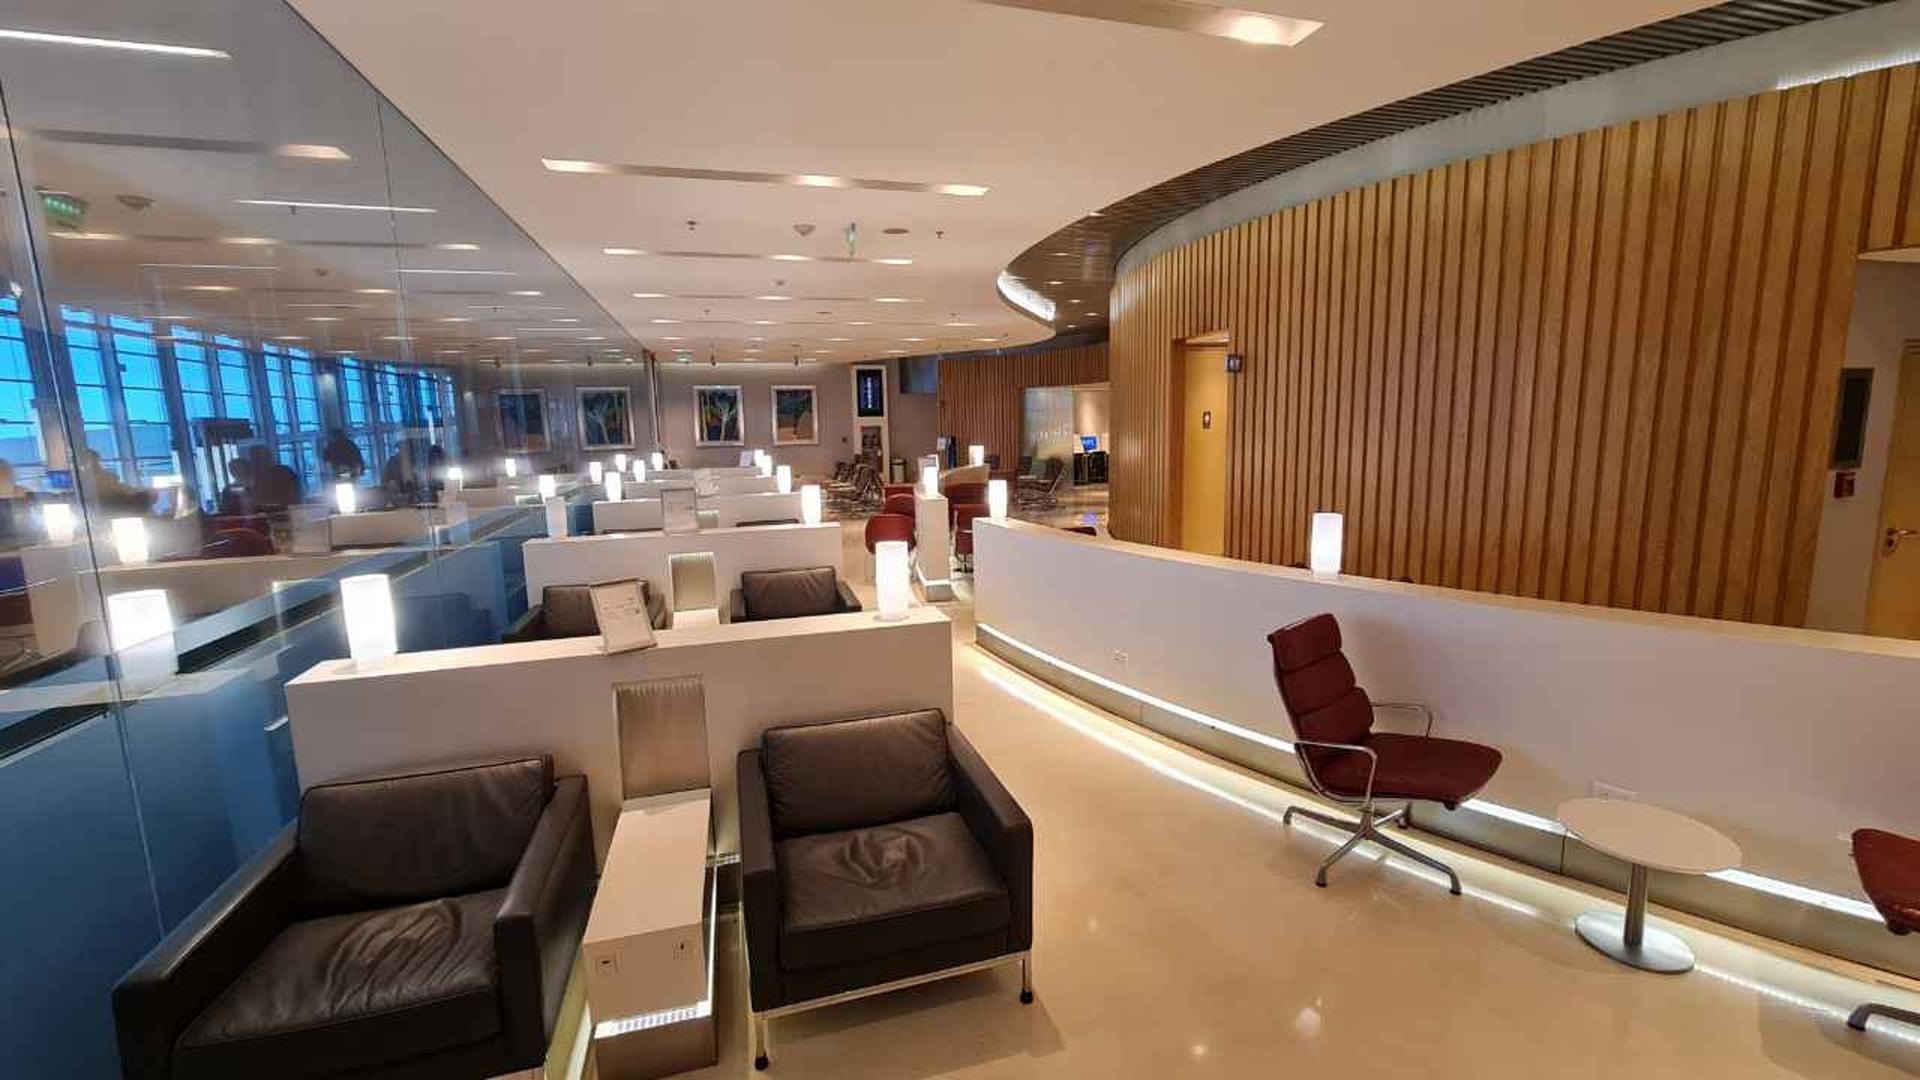 American Airlines Admirals Club & Iberia VIP Lounge image 17 of 18